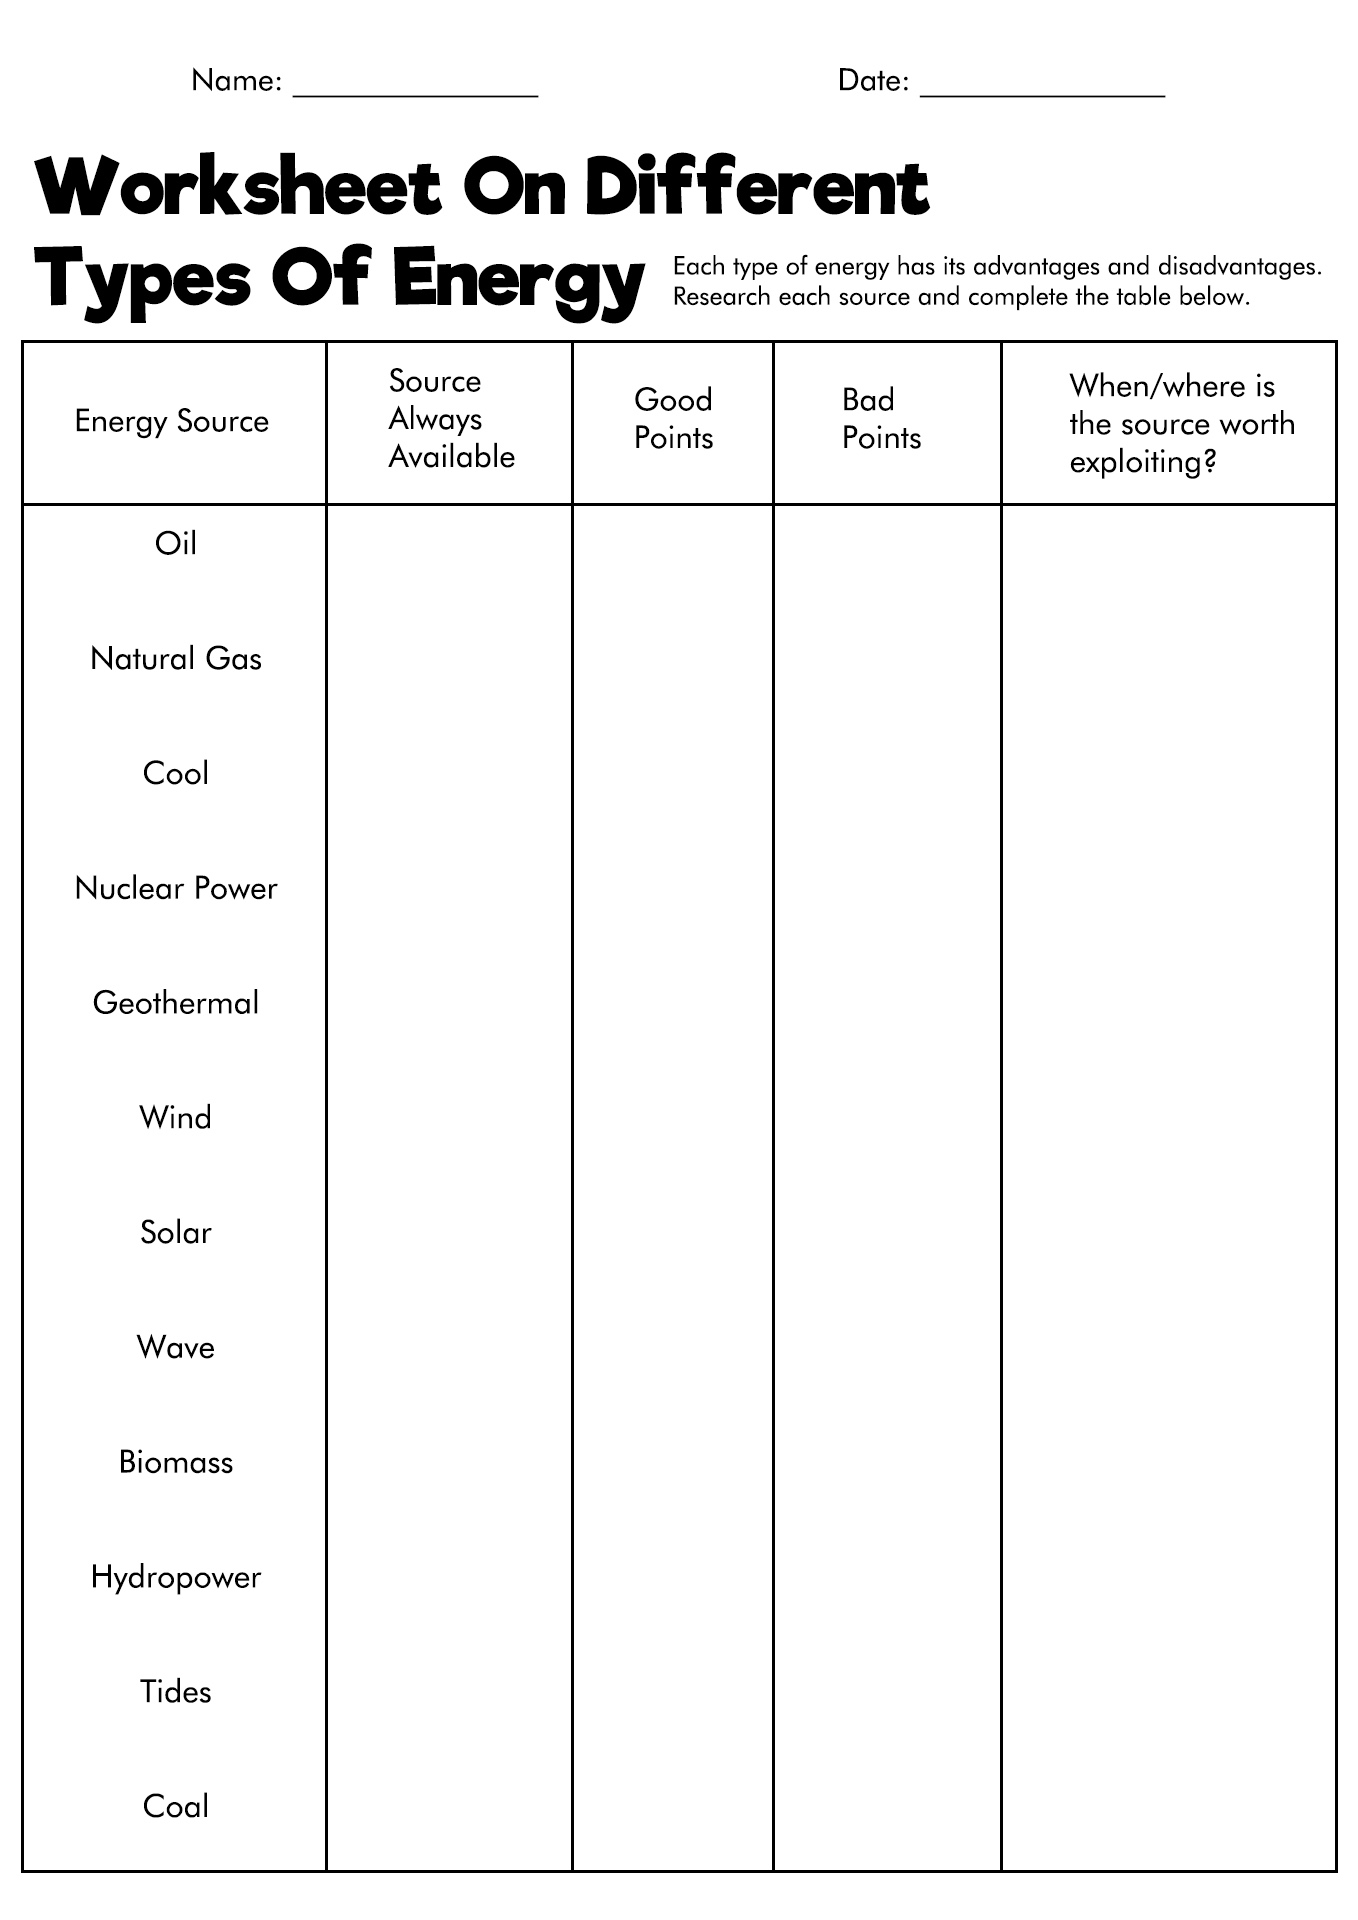 Forms of Energy Worksheet Answers Image